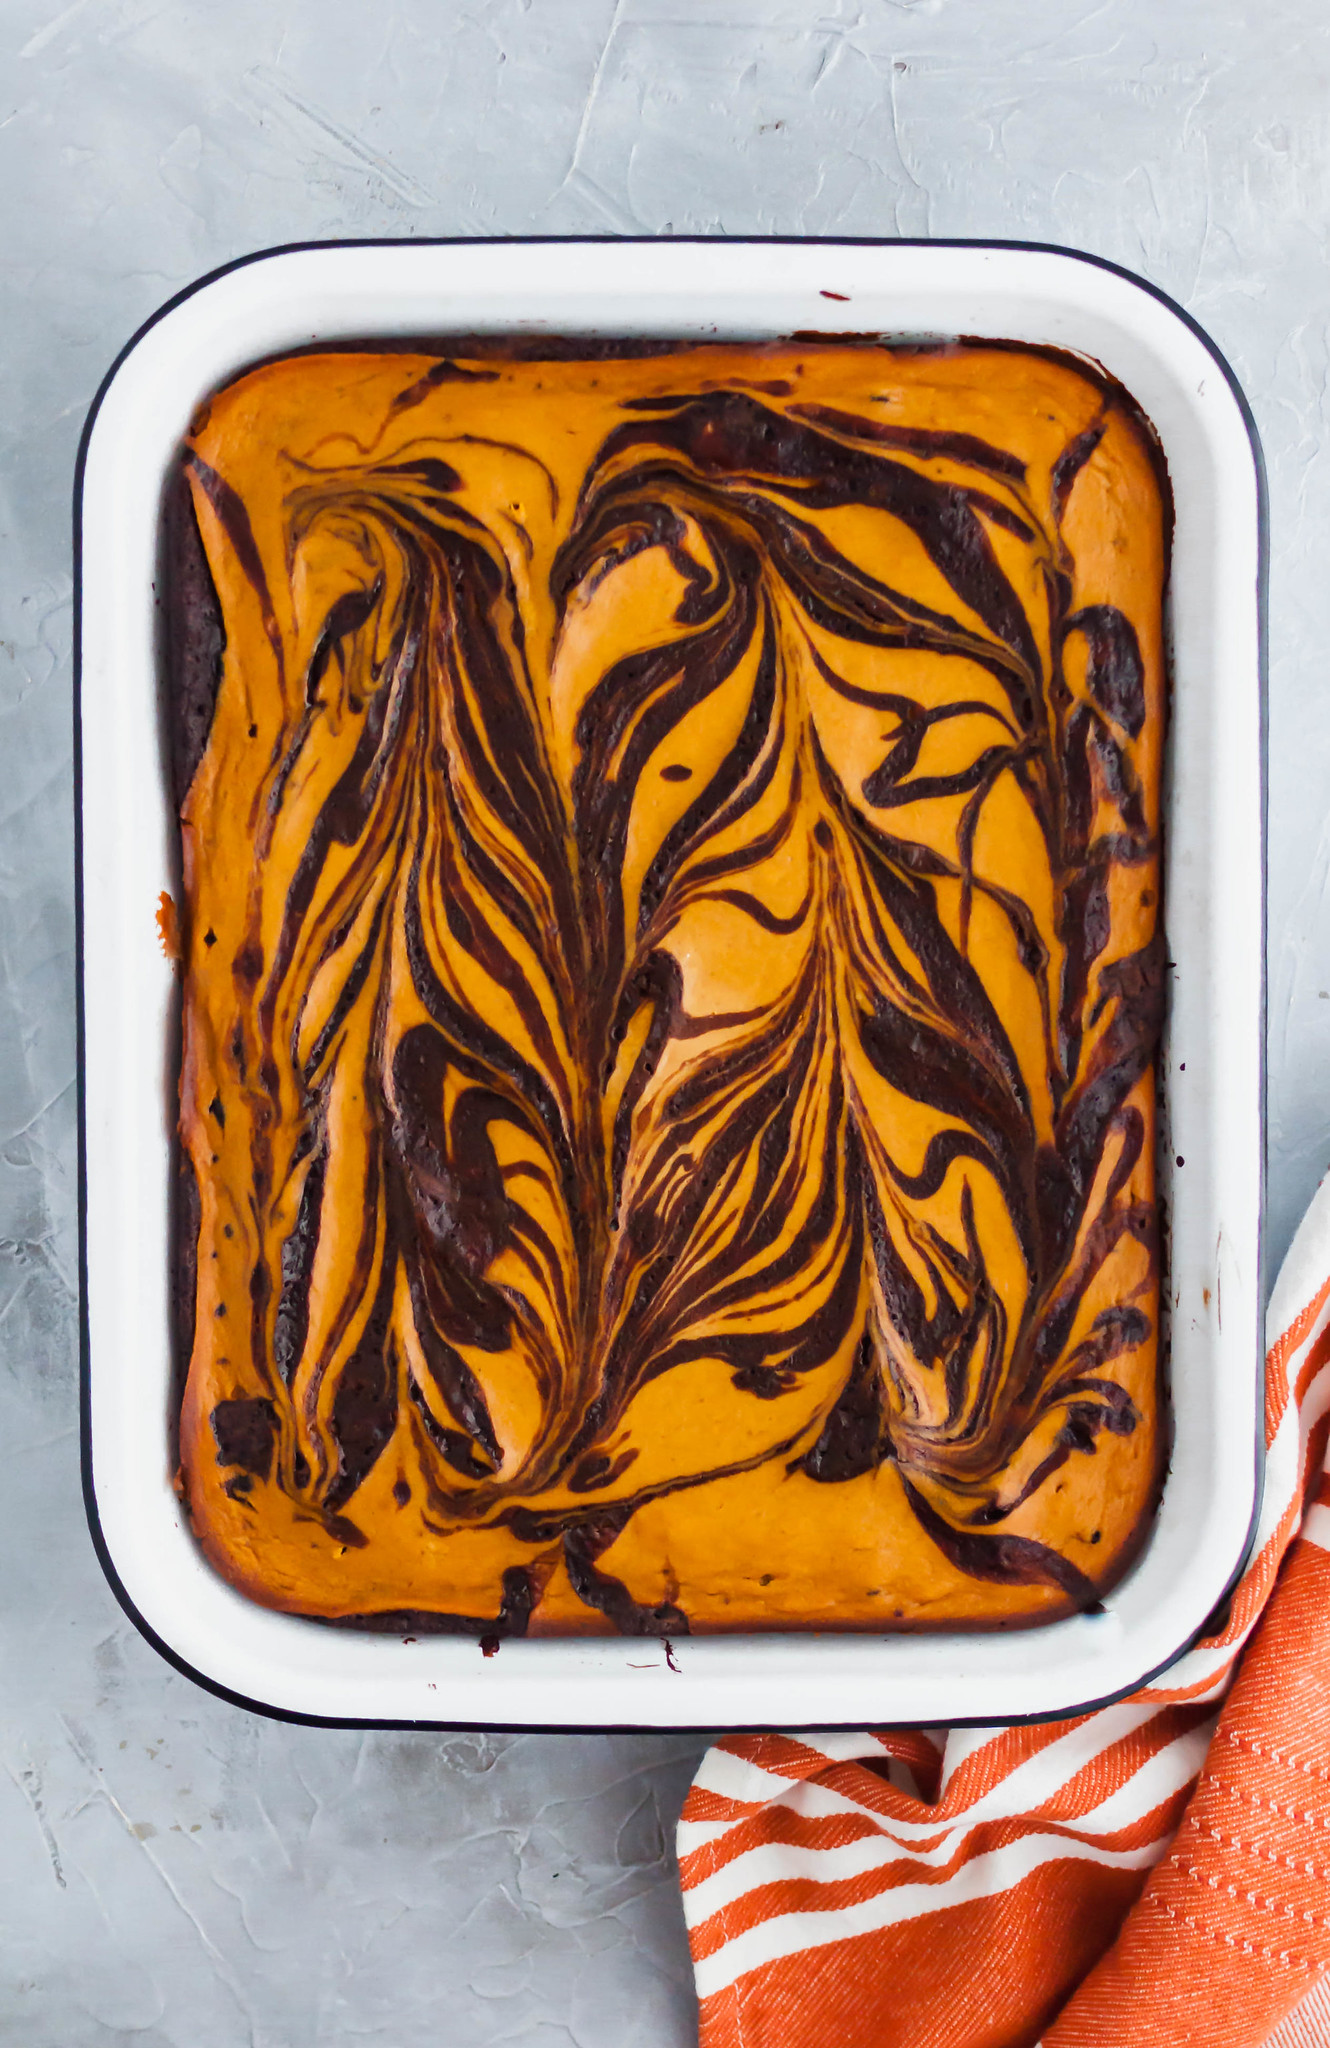 These Pumpkin Cheesecake Brownies are a must try dessert this fall. Thick, fudgy one pot brownies topped with a simple, delicious spiced pumpkin cheesecake. Fall perfection.